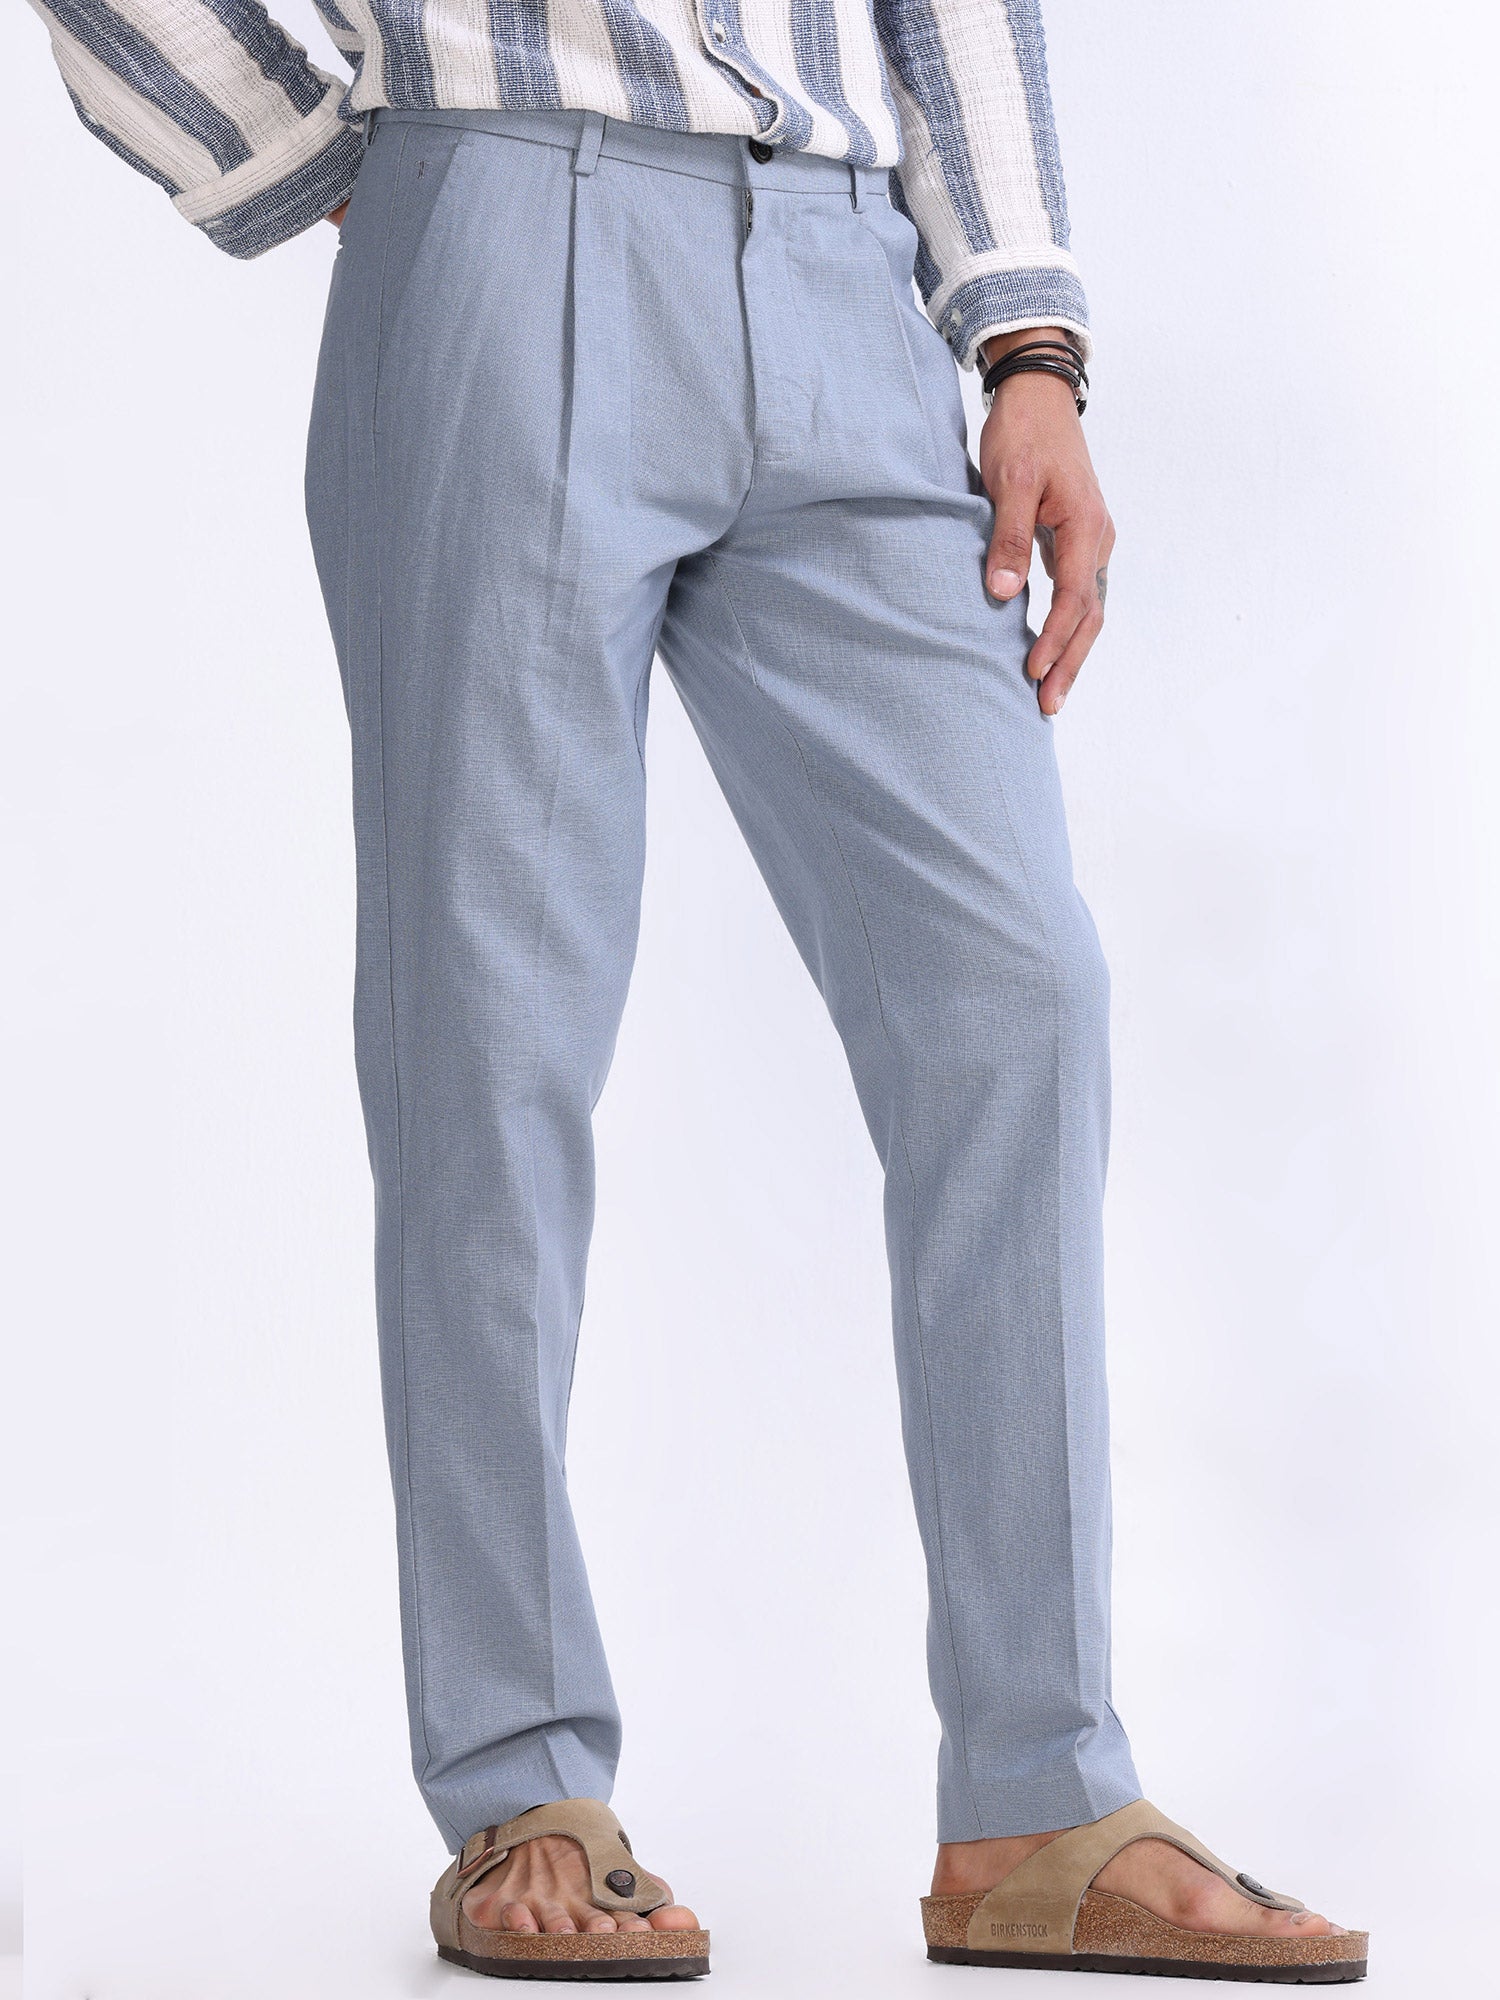 Drago Faded Blue S130s Tropical Wool Dress Pant - Custom Fit Tailored  Clothing